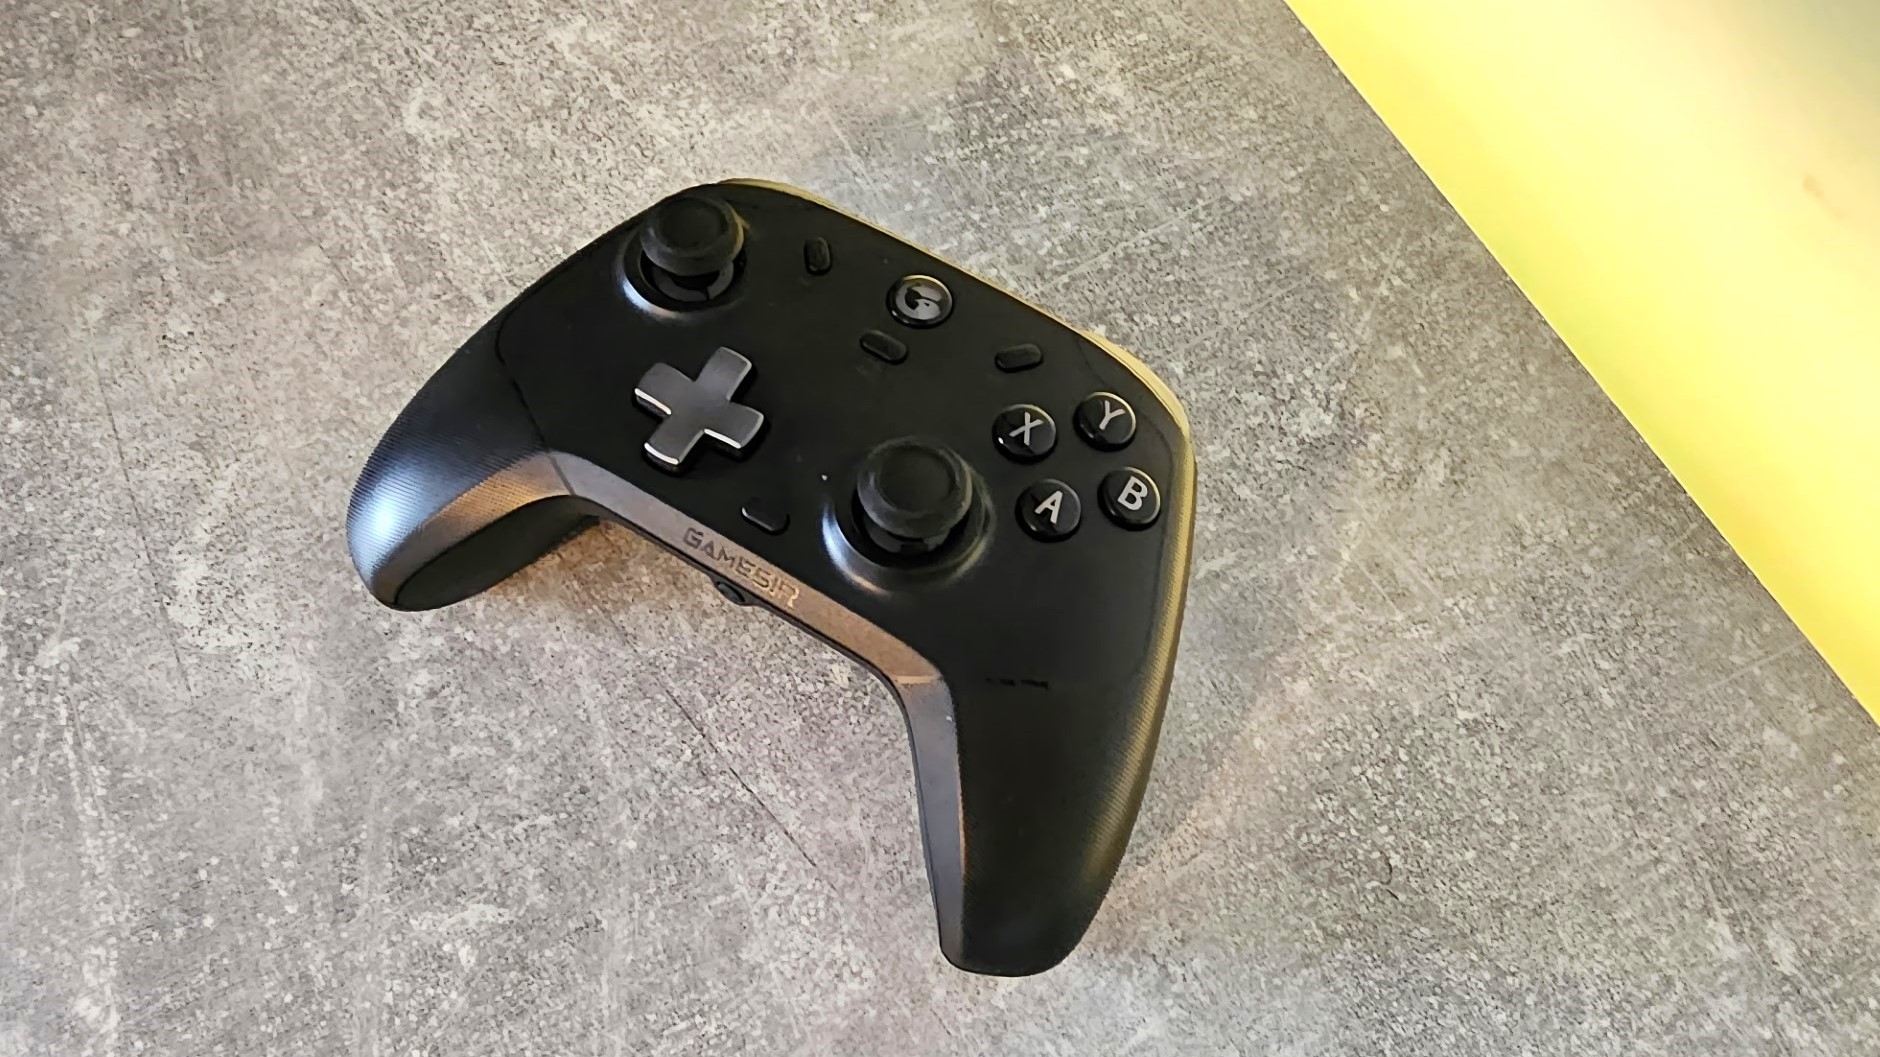 GameSir G7 Wired Controller Review: Pro Features at a Budget Price